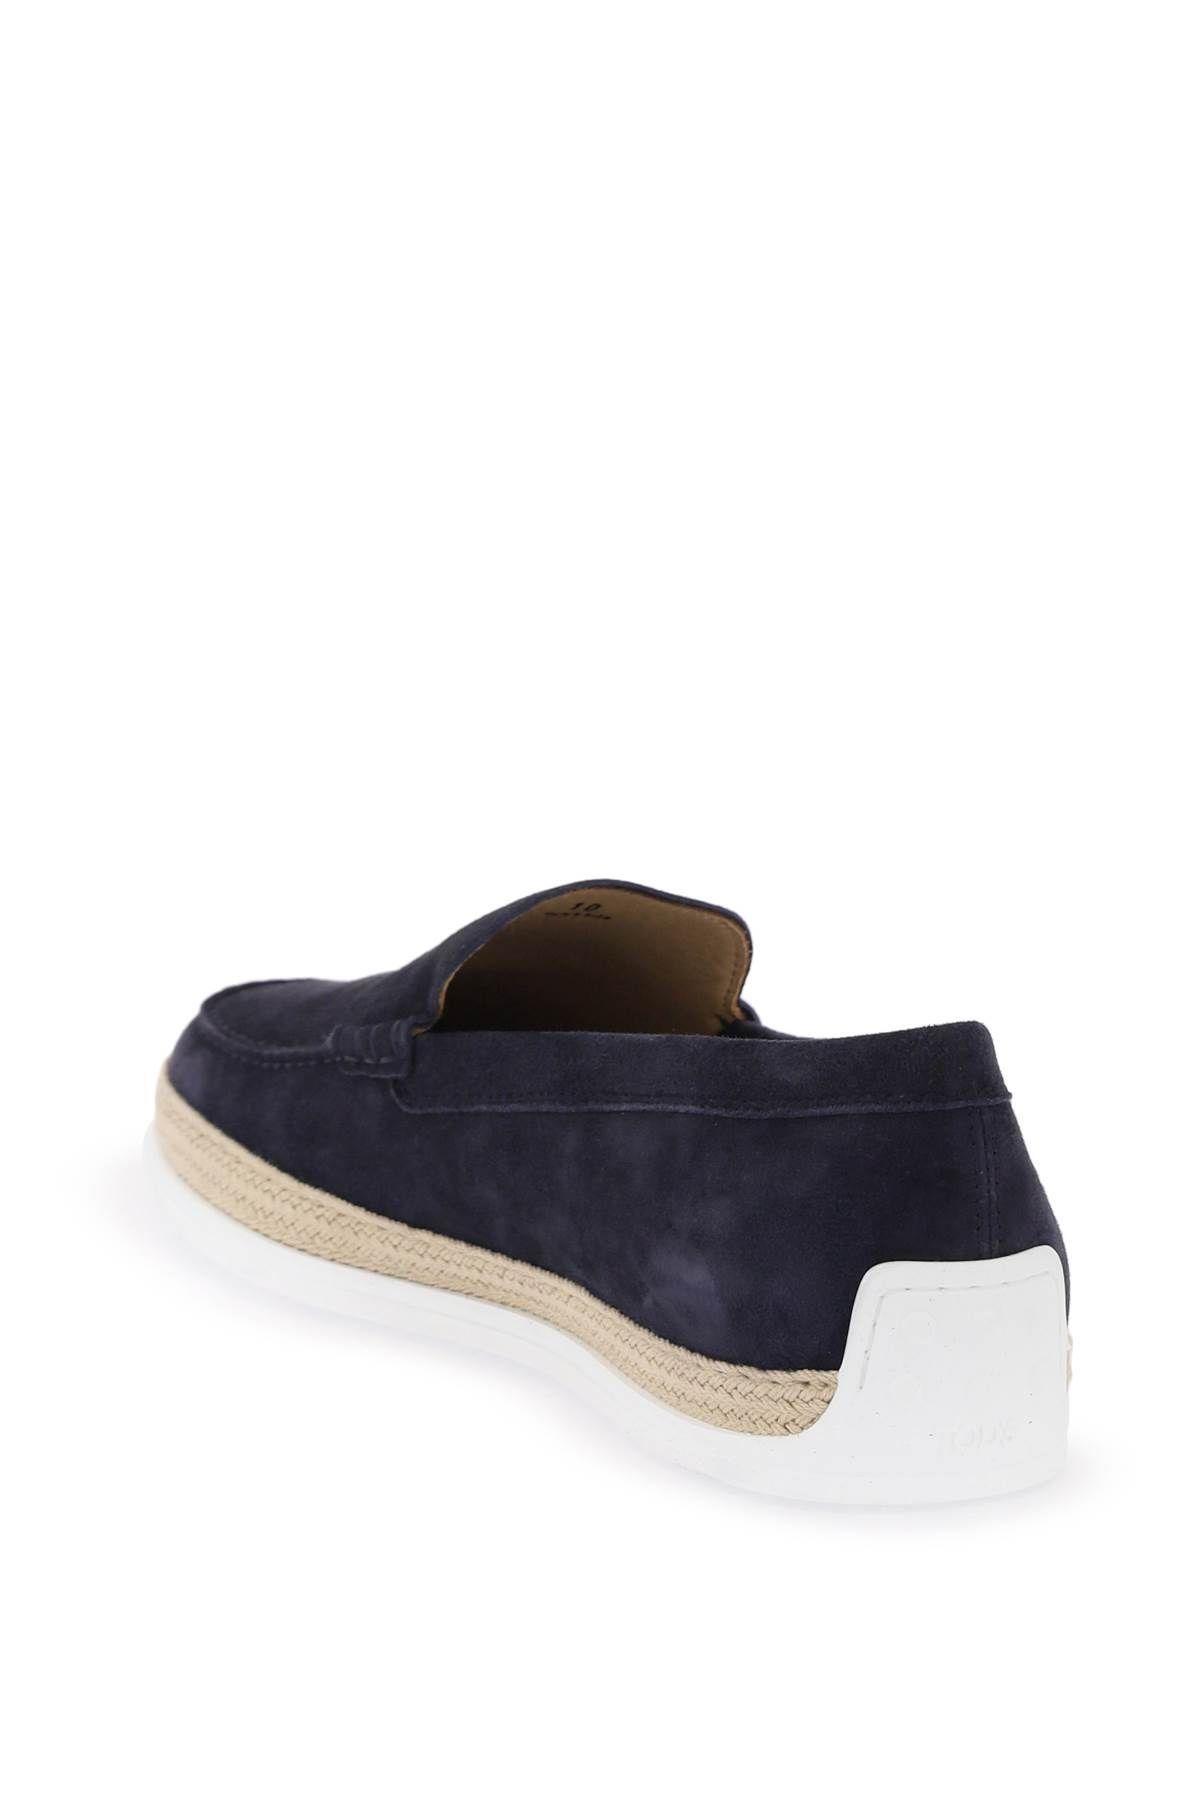 Suede slip-on with rafia insert Tod's - 2